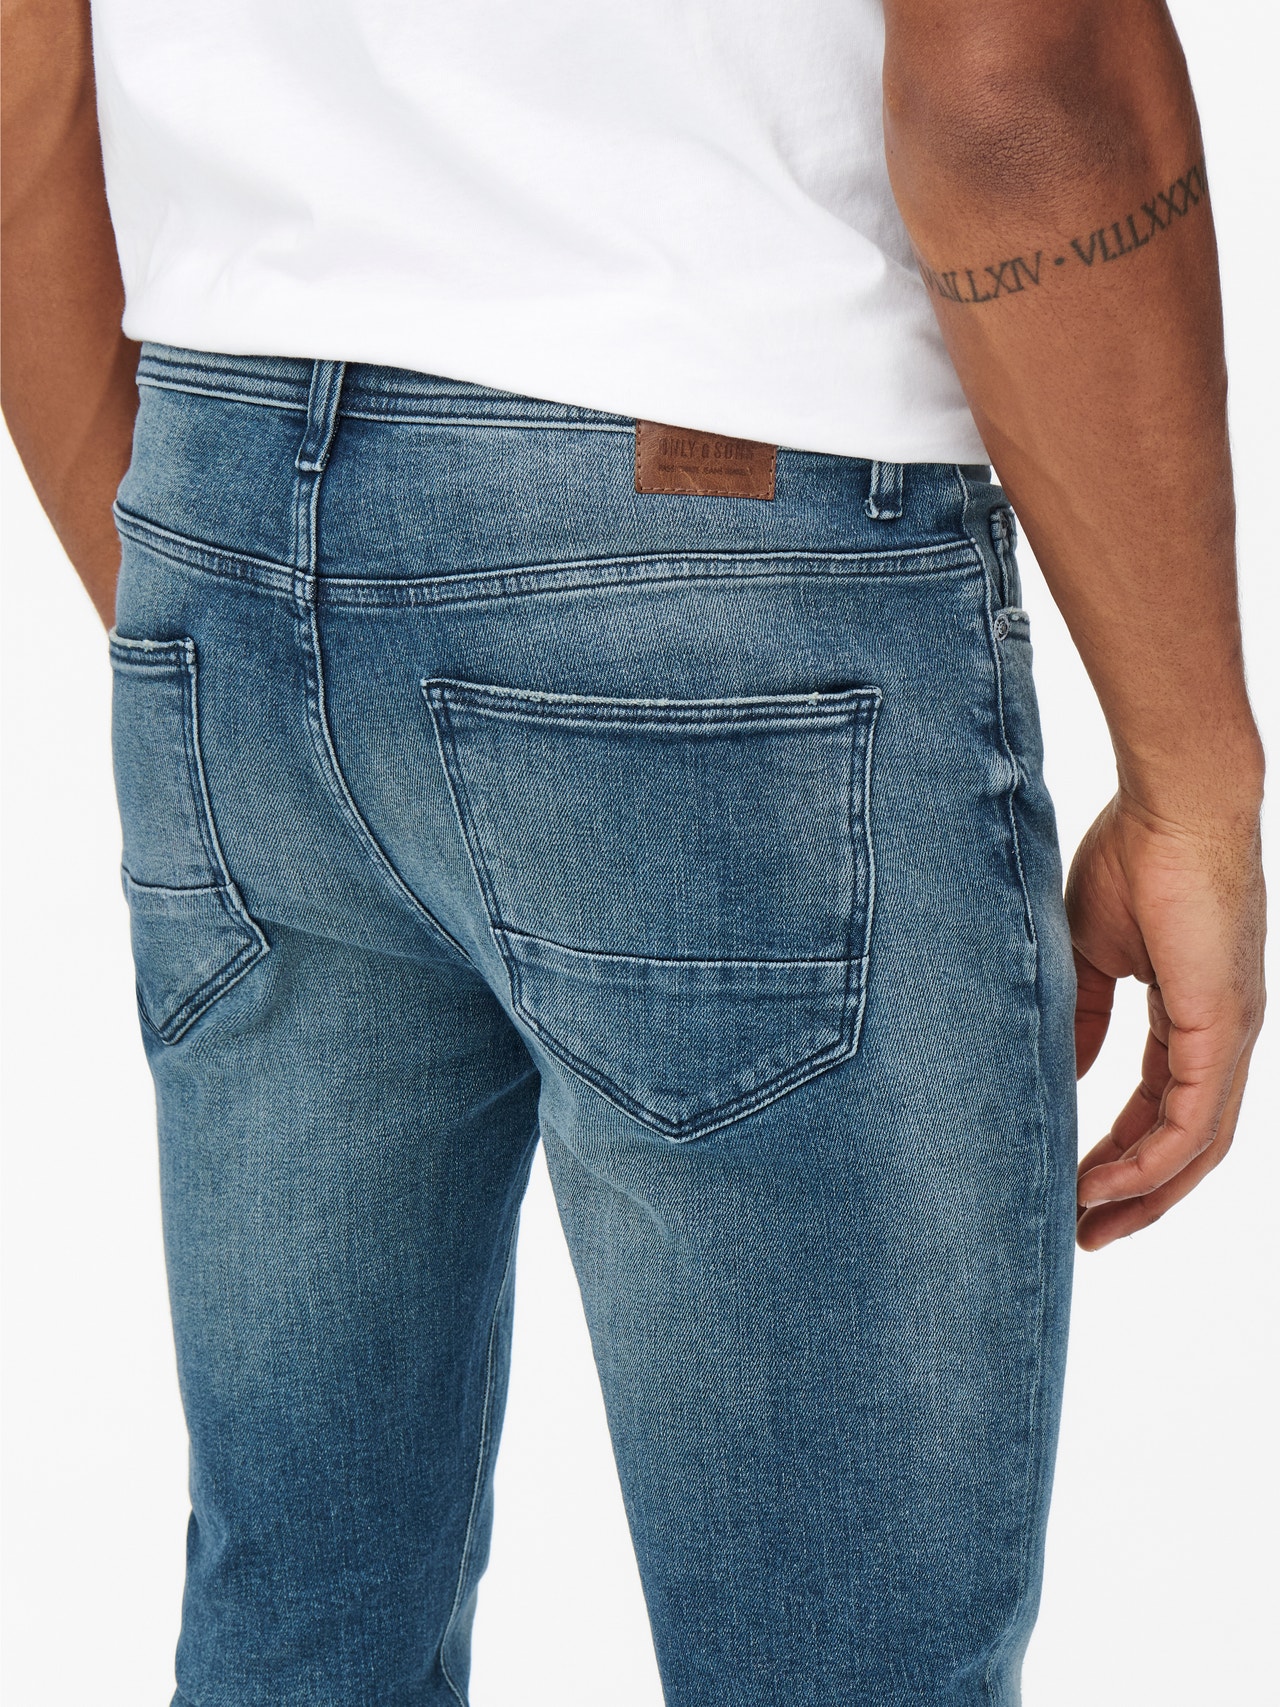 ONLY & SONS Jeans Slim Fit Taille moyenne Ourlé destroy -Blue Denim - 22021423